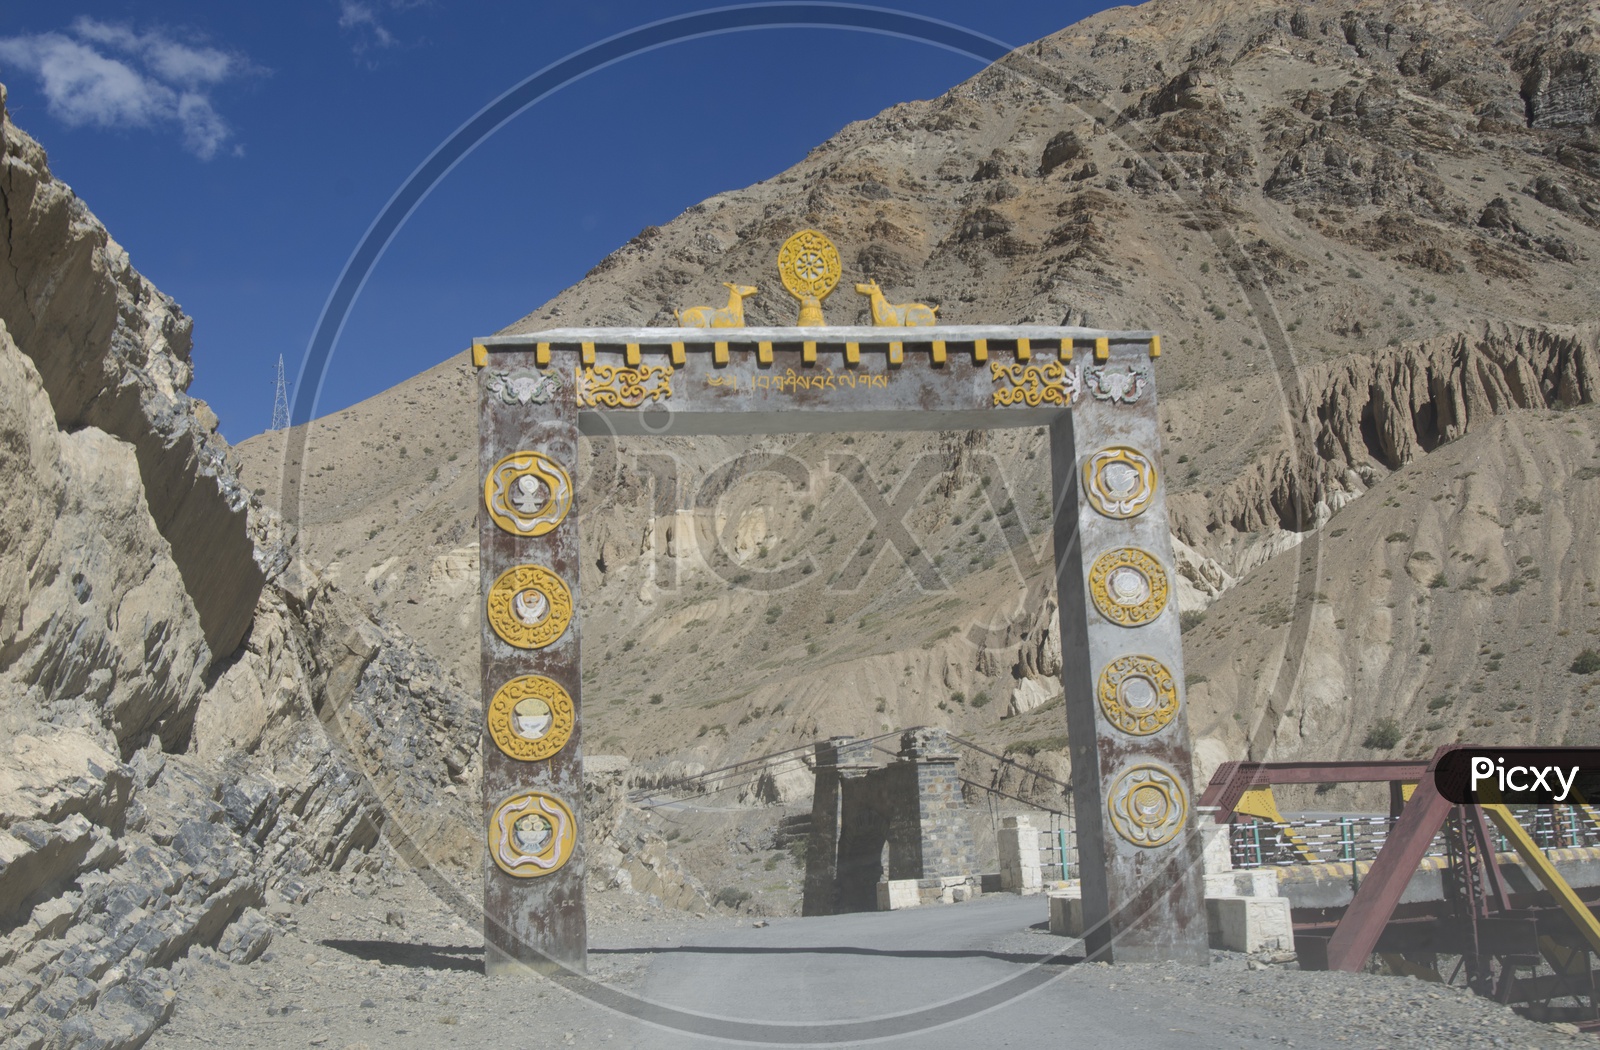 Welcome Arches For Monasteries On The Roads Of Leh